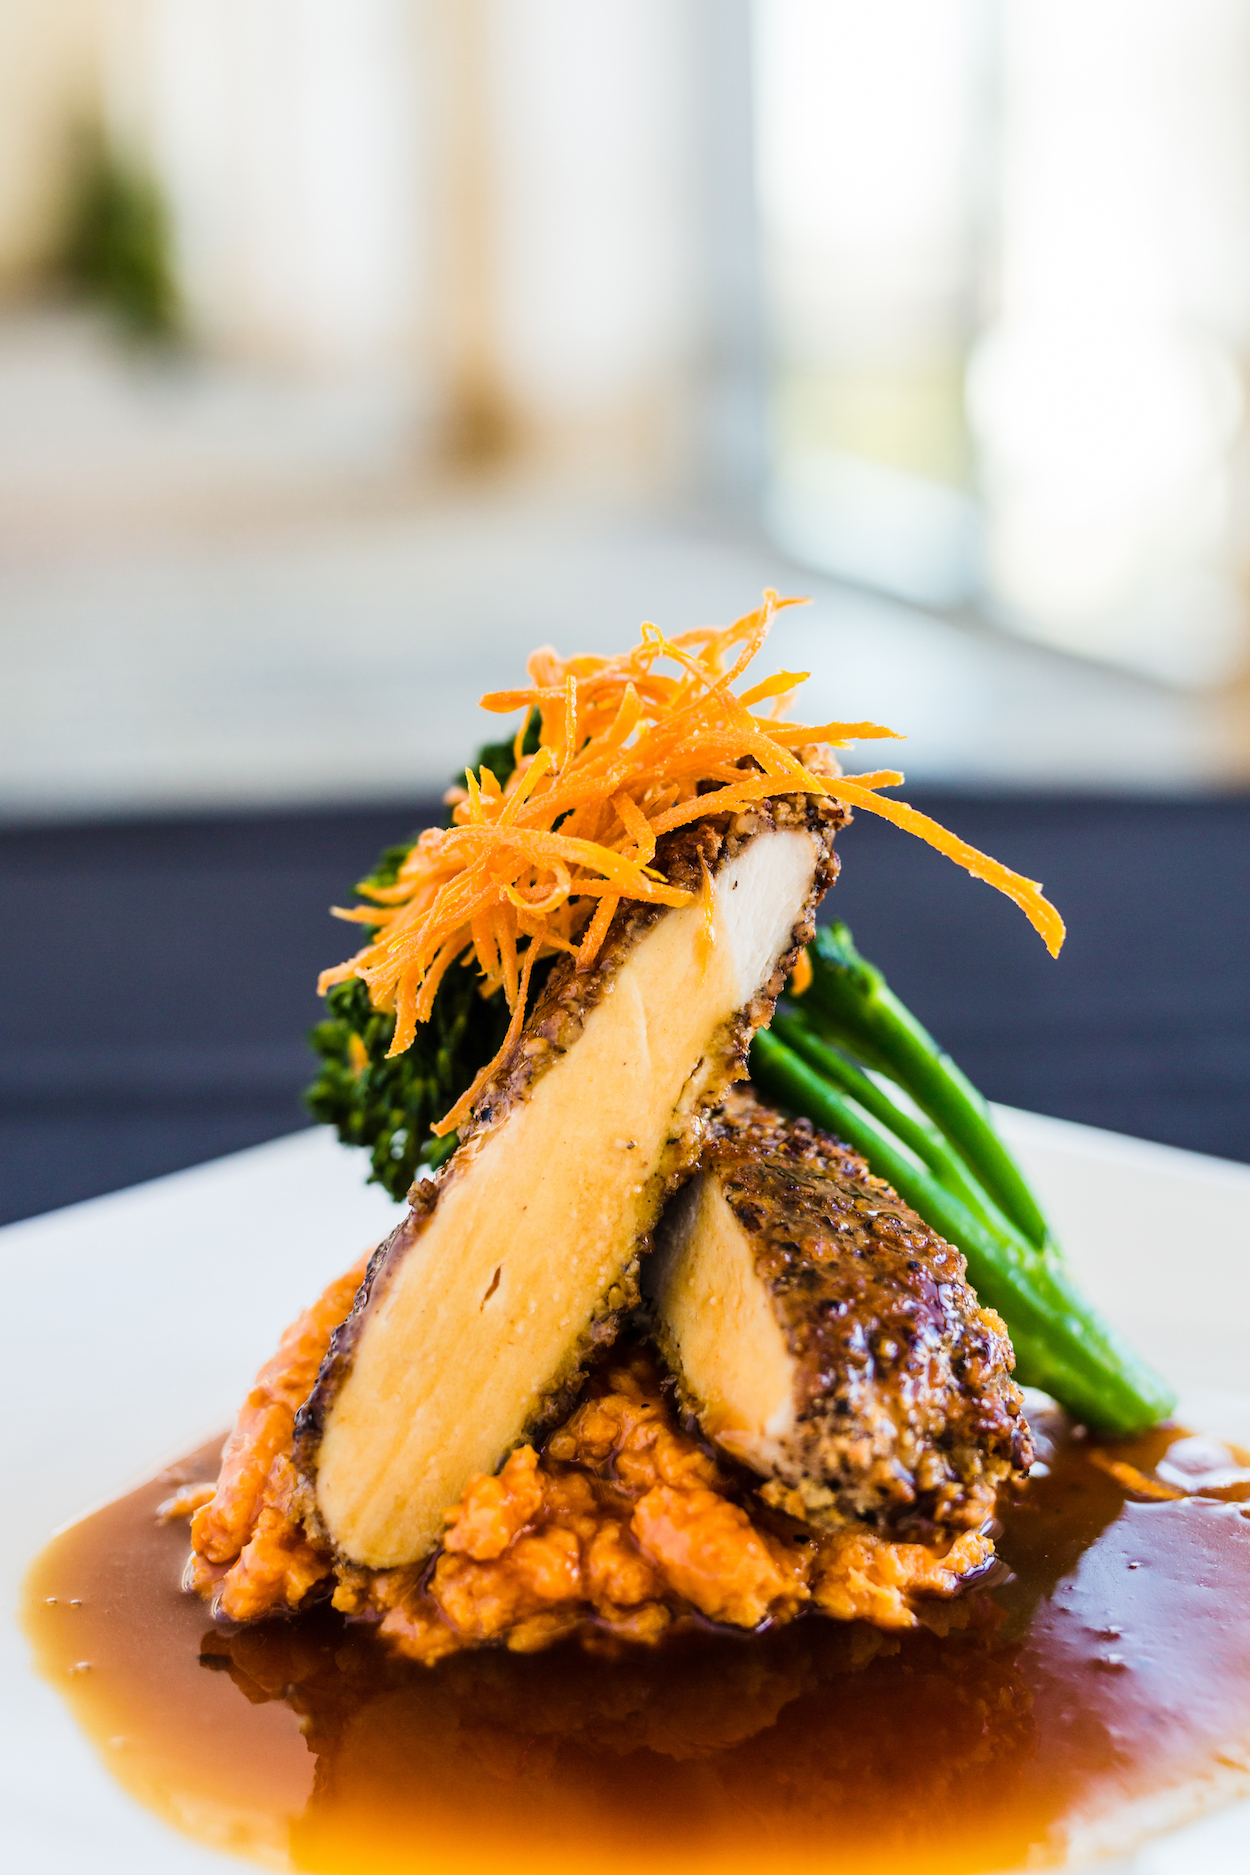 Pecan-crusted chicken breast with sweet bourbon au jus and other seasonal delicacies